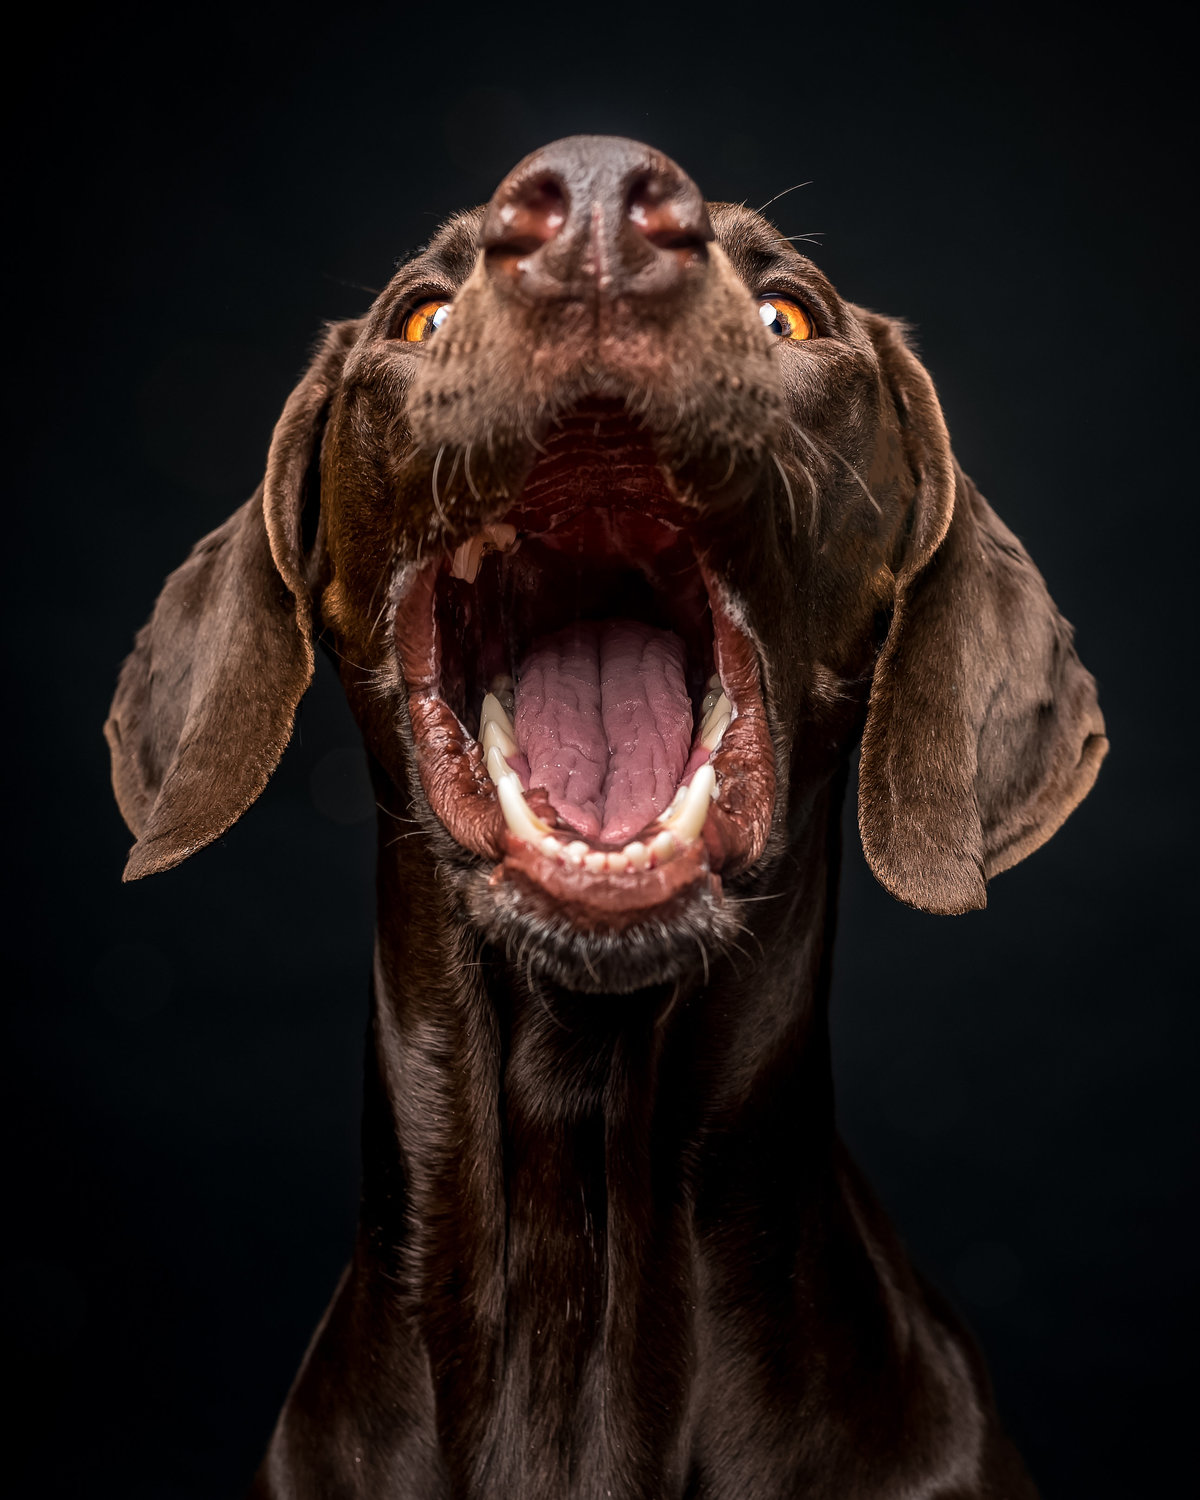 Humorous Brown dog with mouth wide open catching treats